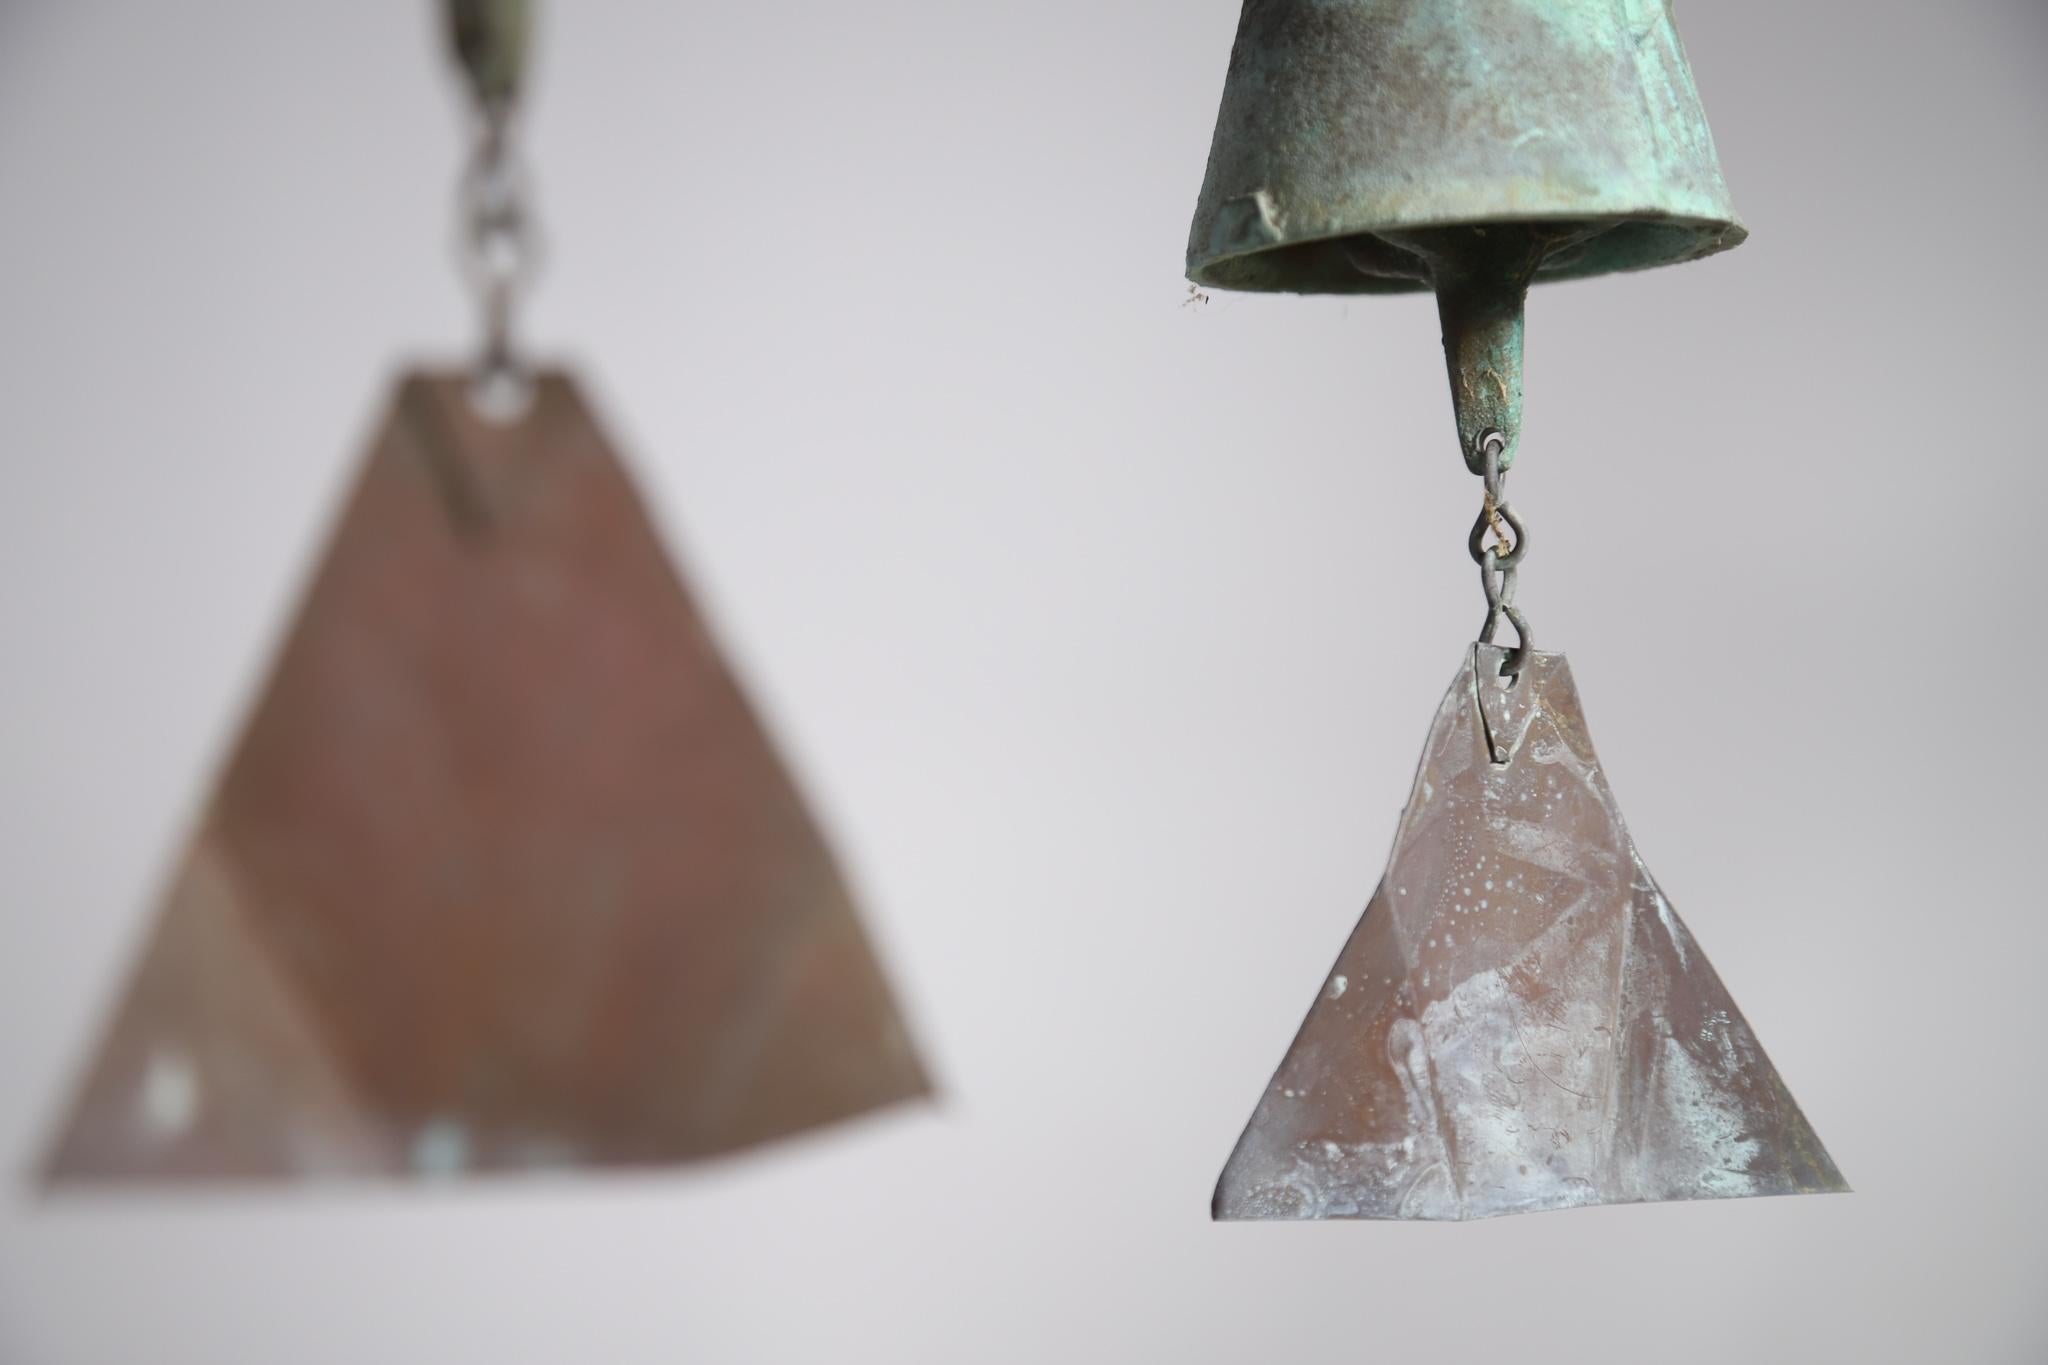 American Bronze Paolo Soleri Wind Bell Chime